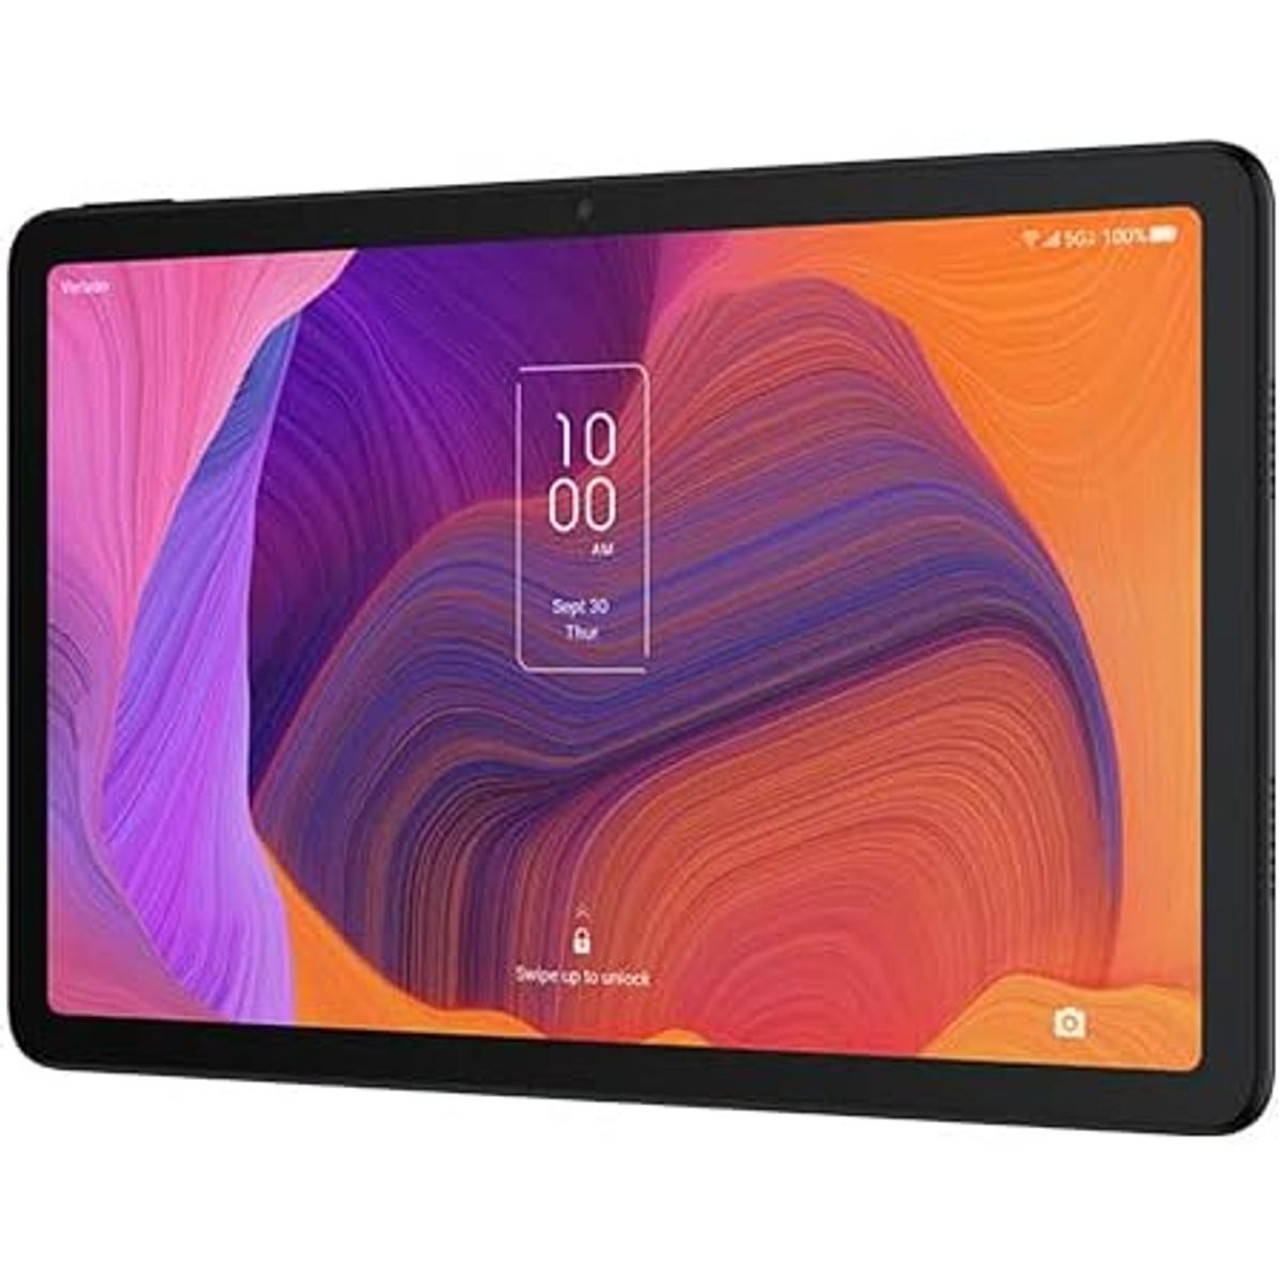 TCL TAB Pro 5G Tablet Computer product image